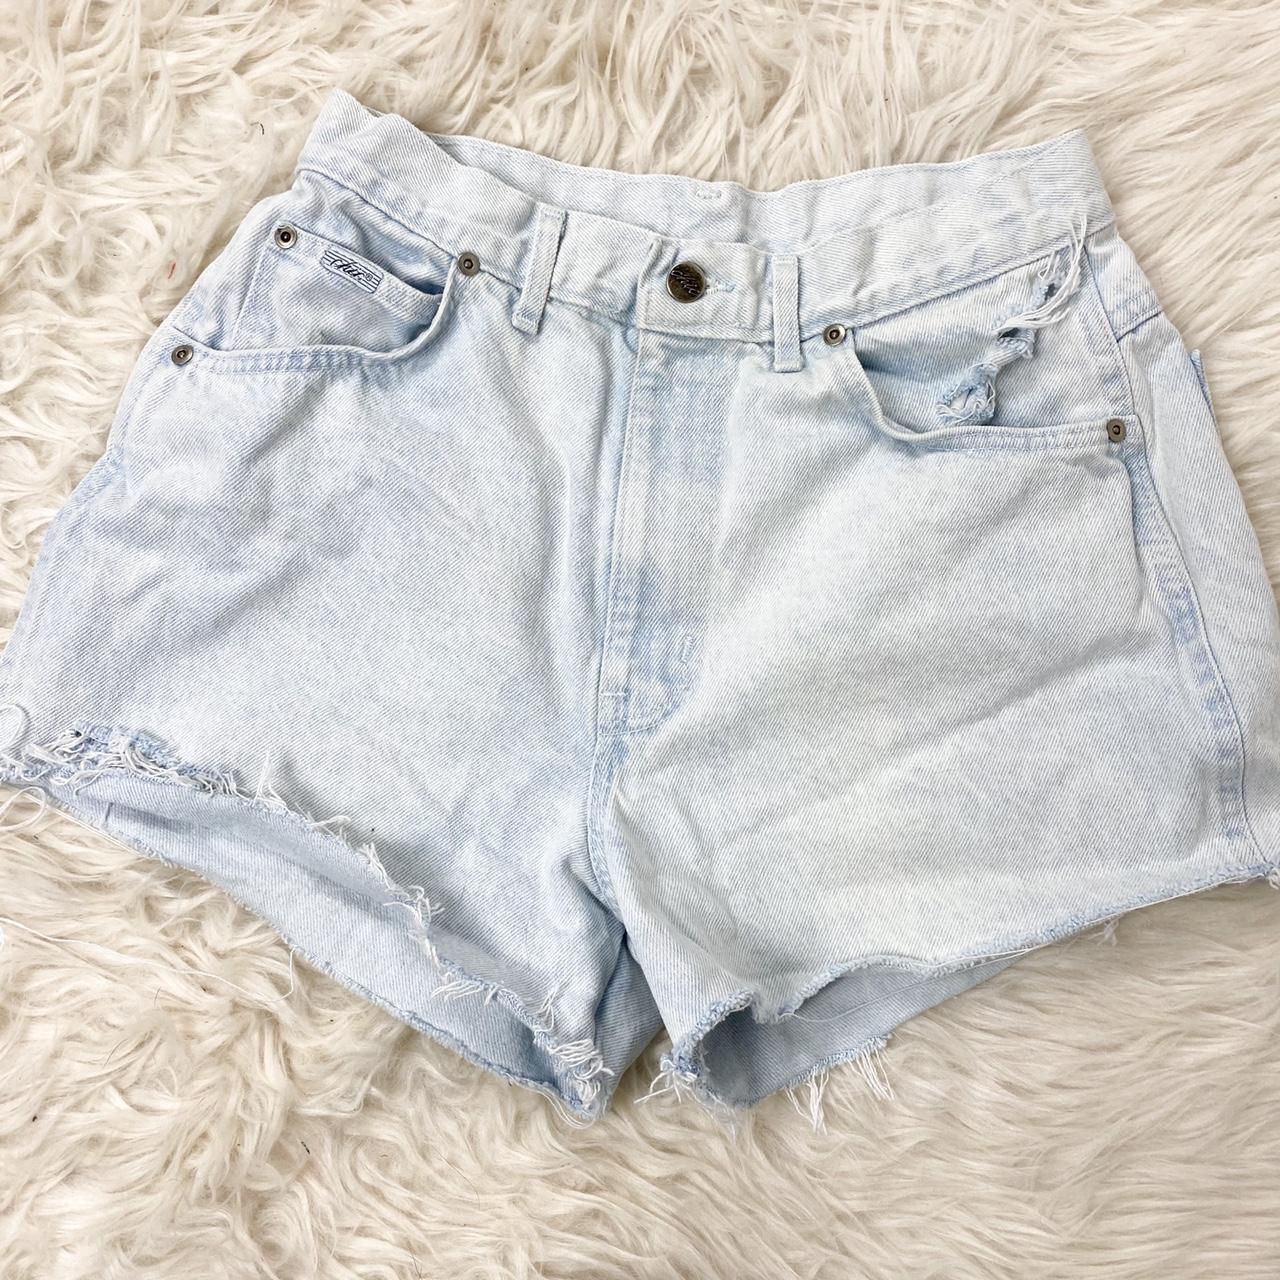 Chic Women's Blue and White Shorts (3)